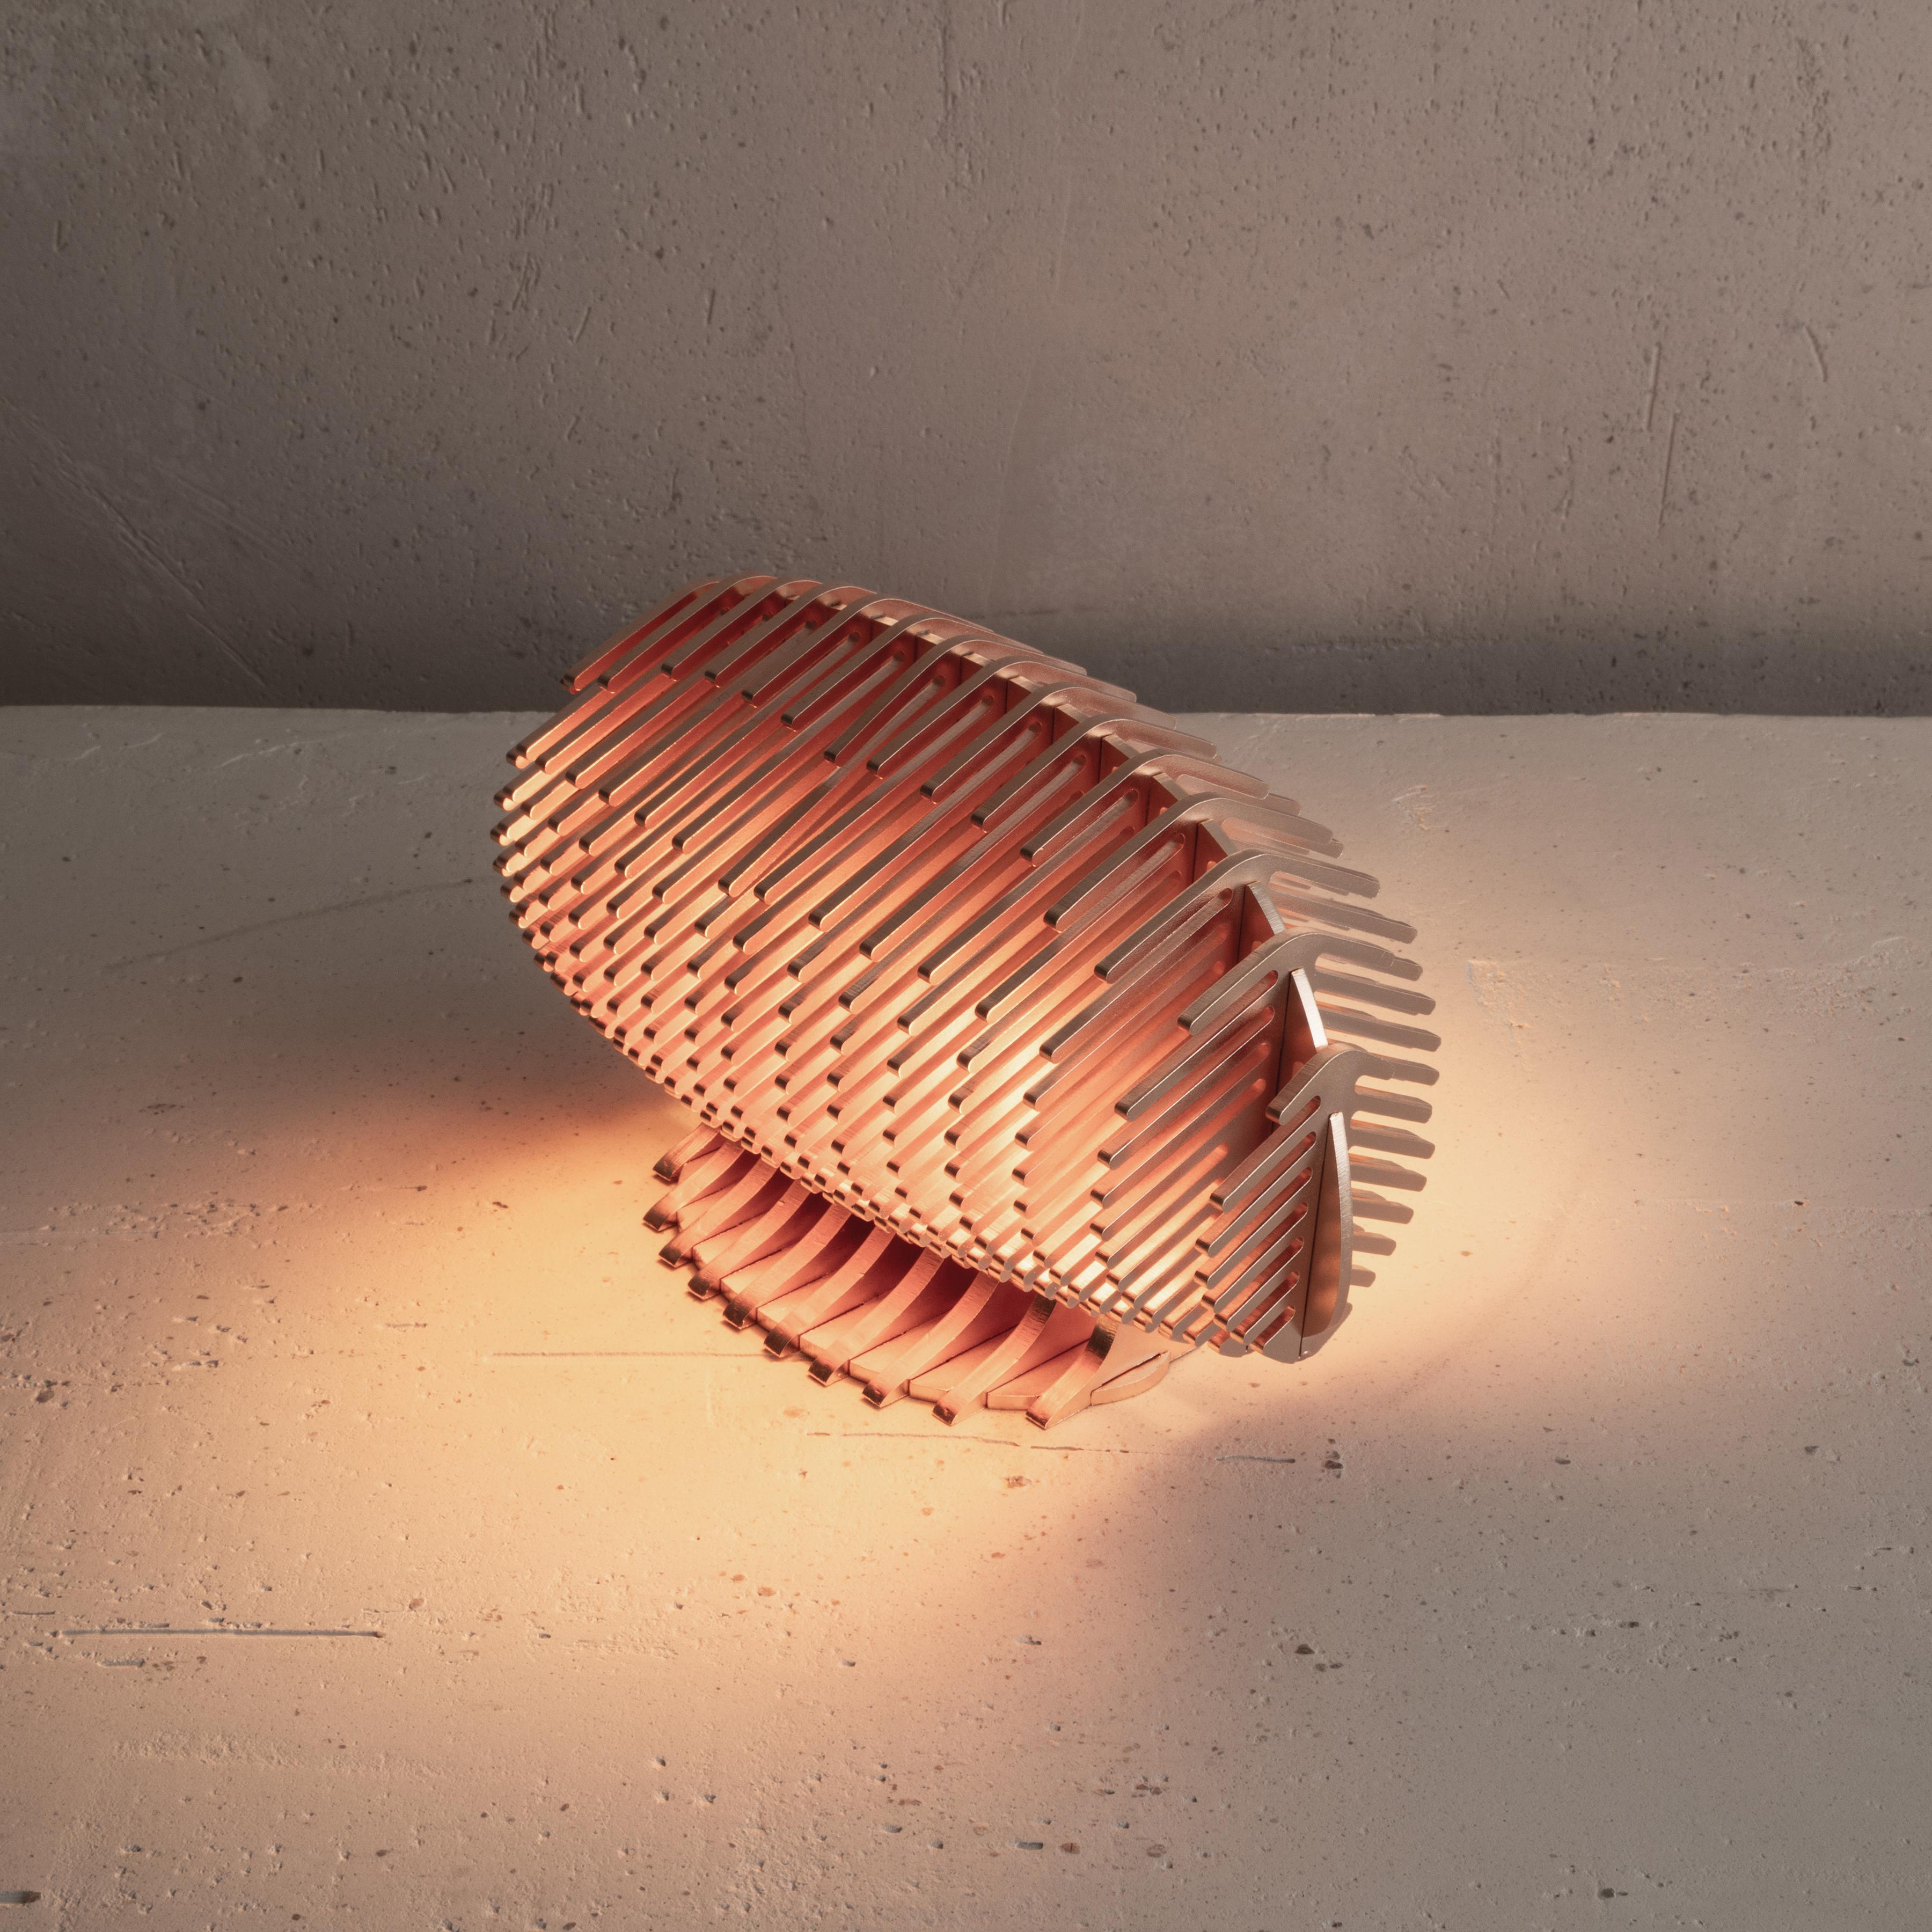 A small, sculptural light source, the lamp H - for hedgehog - may repose on its base whether on flat surface or on the wall.

Dreyfus’s latest “Objets de Lumière” (Objects of Light) expand on the artist’s significant body of work and his continuous